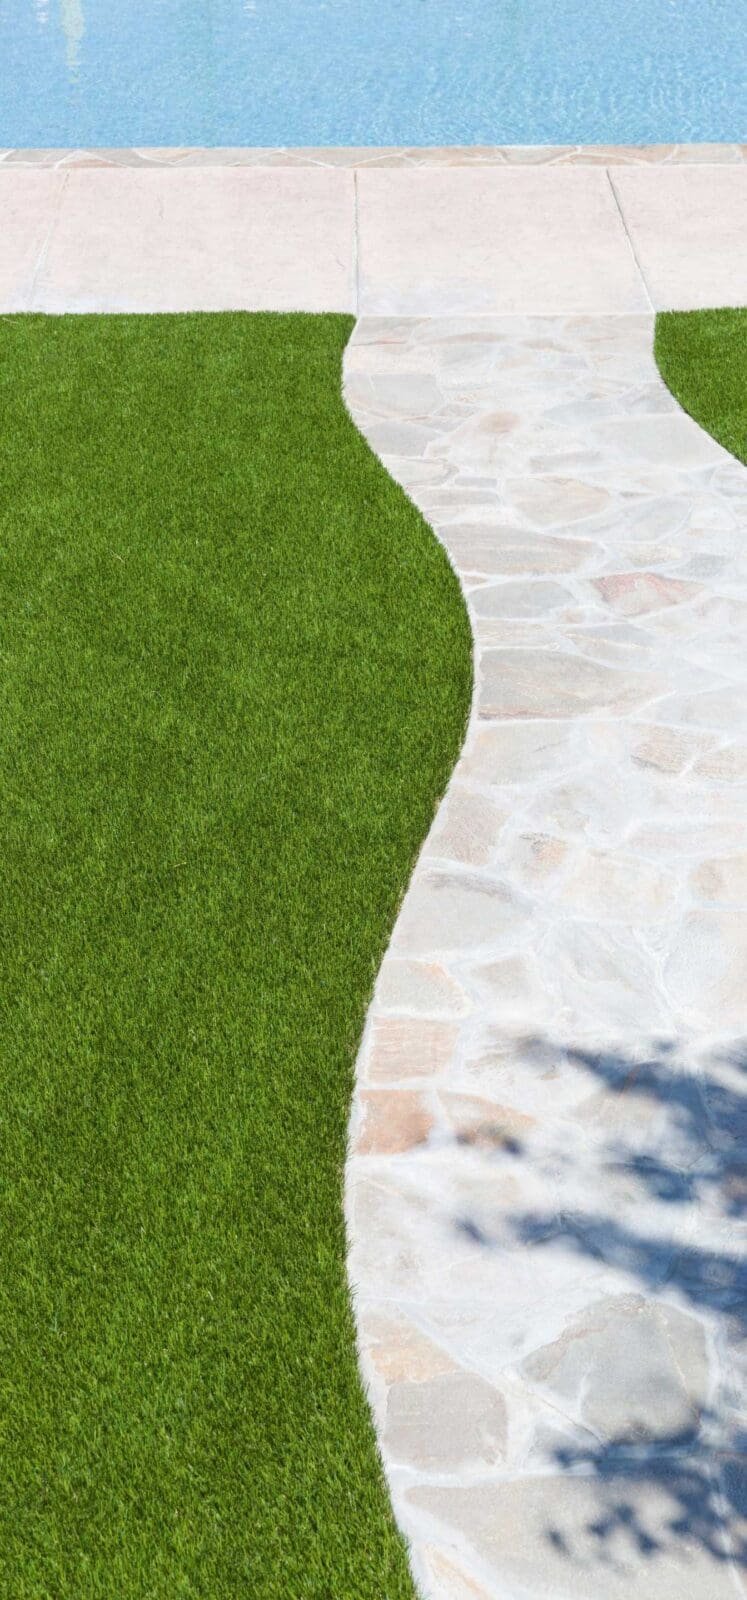 A curved stone pathway runs through a lush lawn of artificial grass, leading up to a sparkling blue swimming pool. This picturesque landscaping project in Maricopa AZ is bright and sunny, with the shadow of a tree partially visible on the grass.